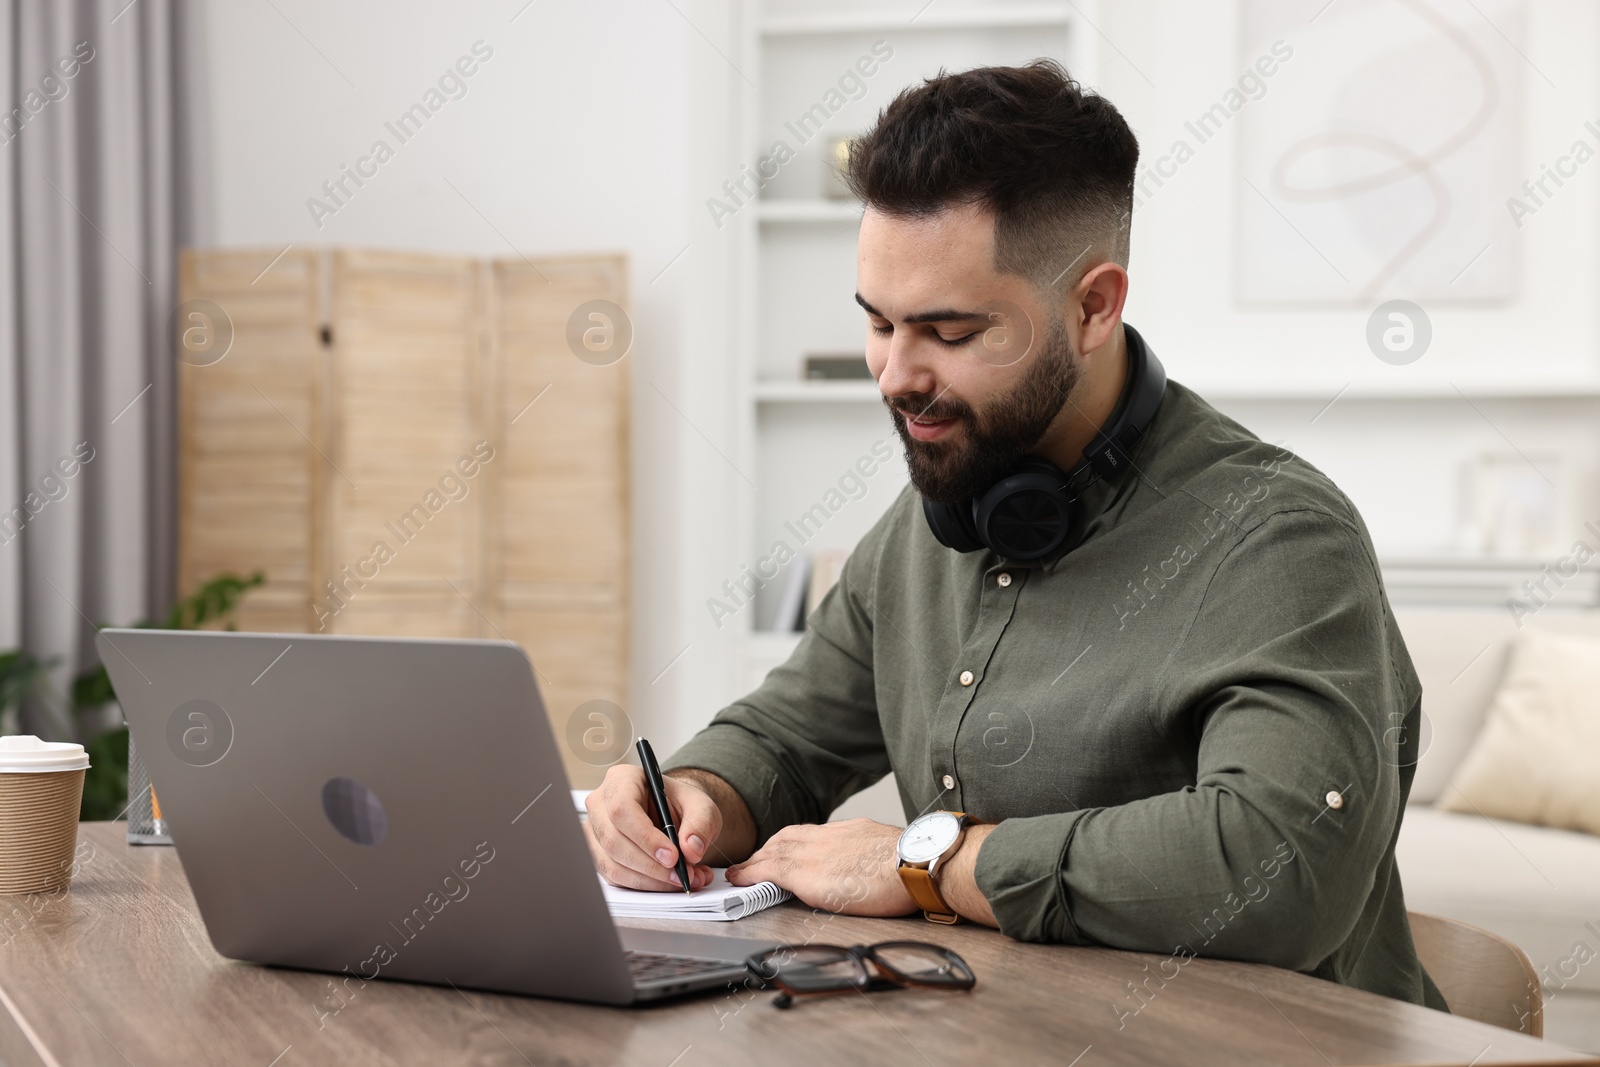 Photo of E-learning. Young man taking notes during online lesson at wooden table indoors